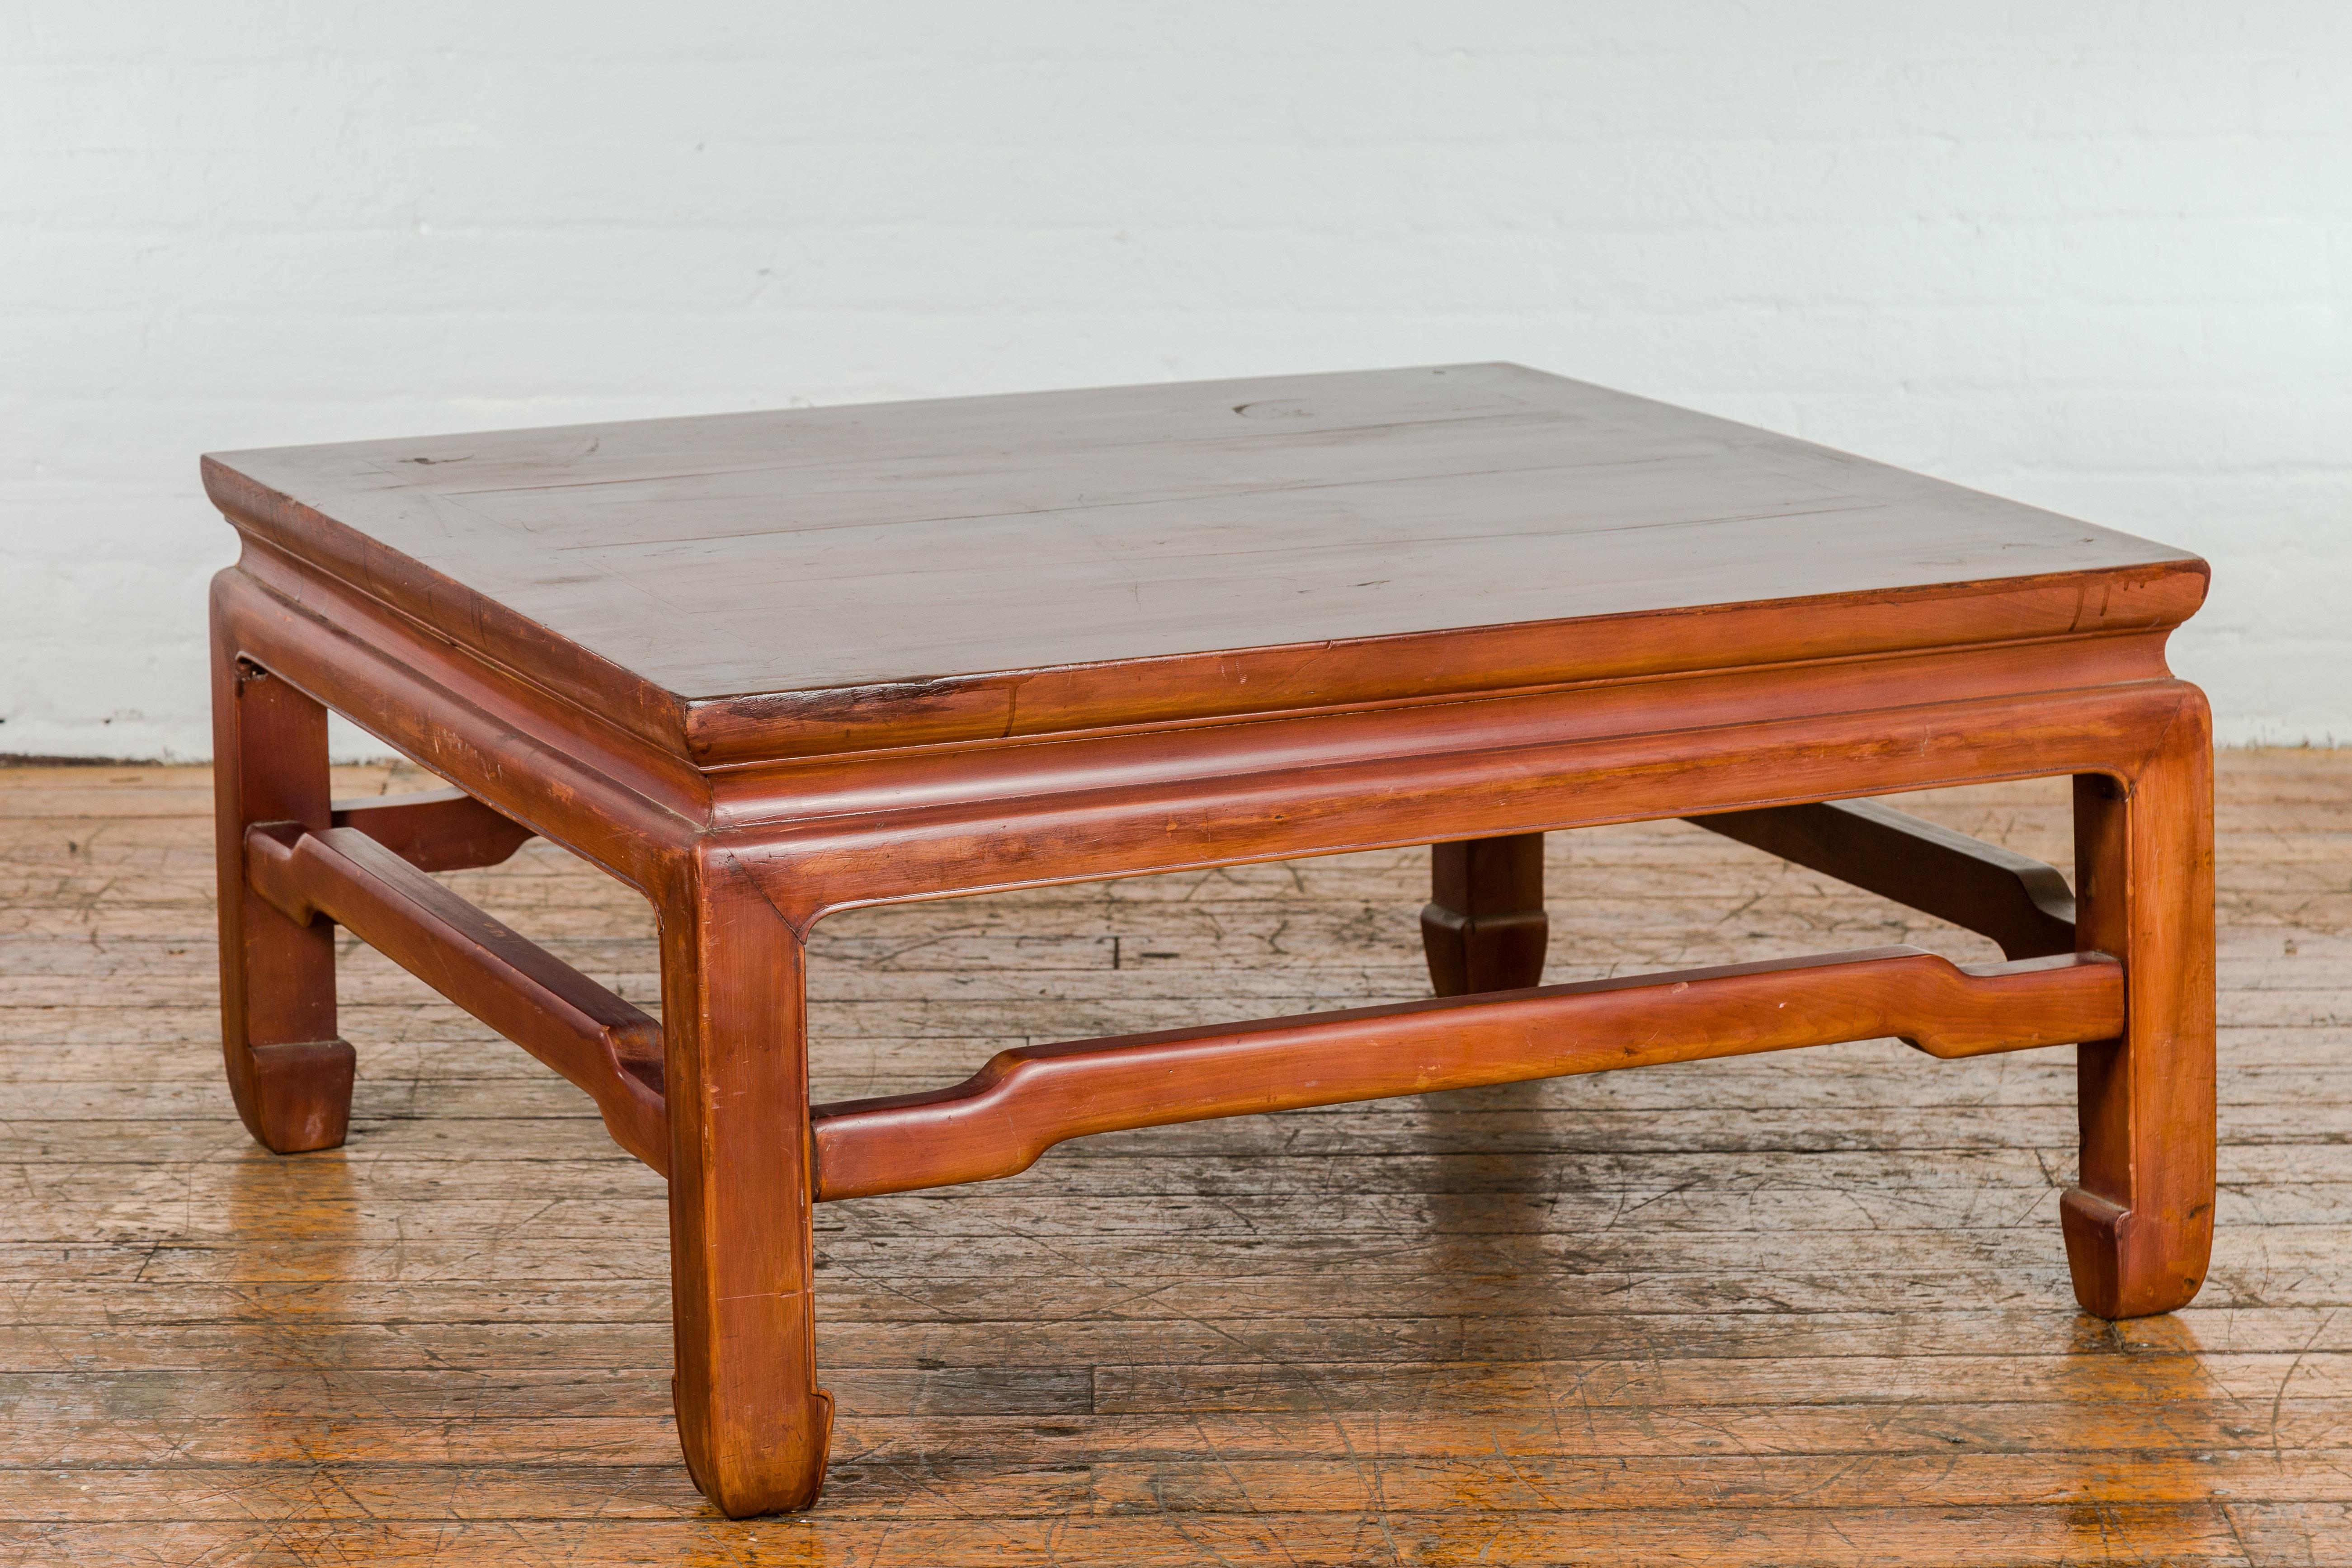 20th Century Square Coffee Table with Humpback Stretcher and Horse Hoof Legs For Sale